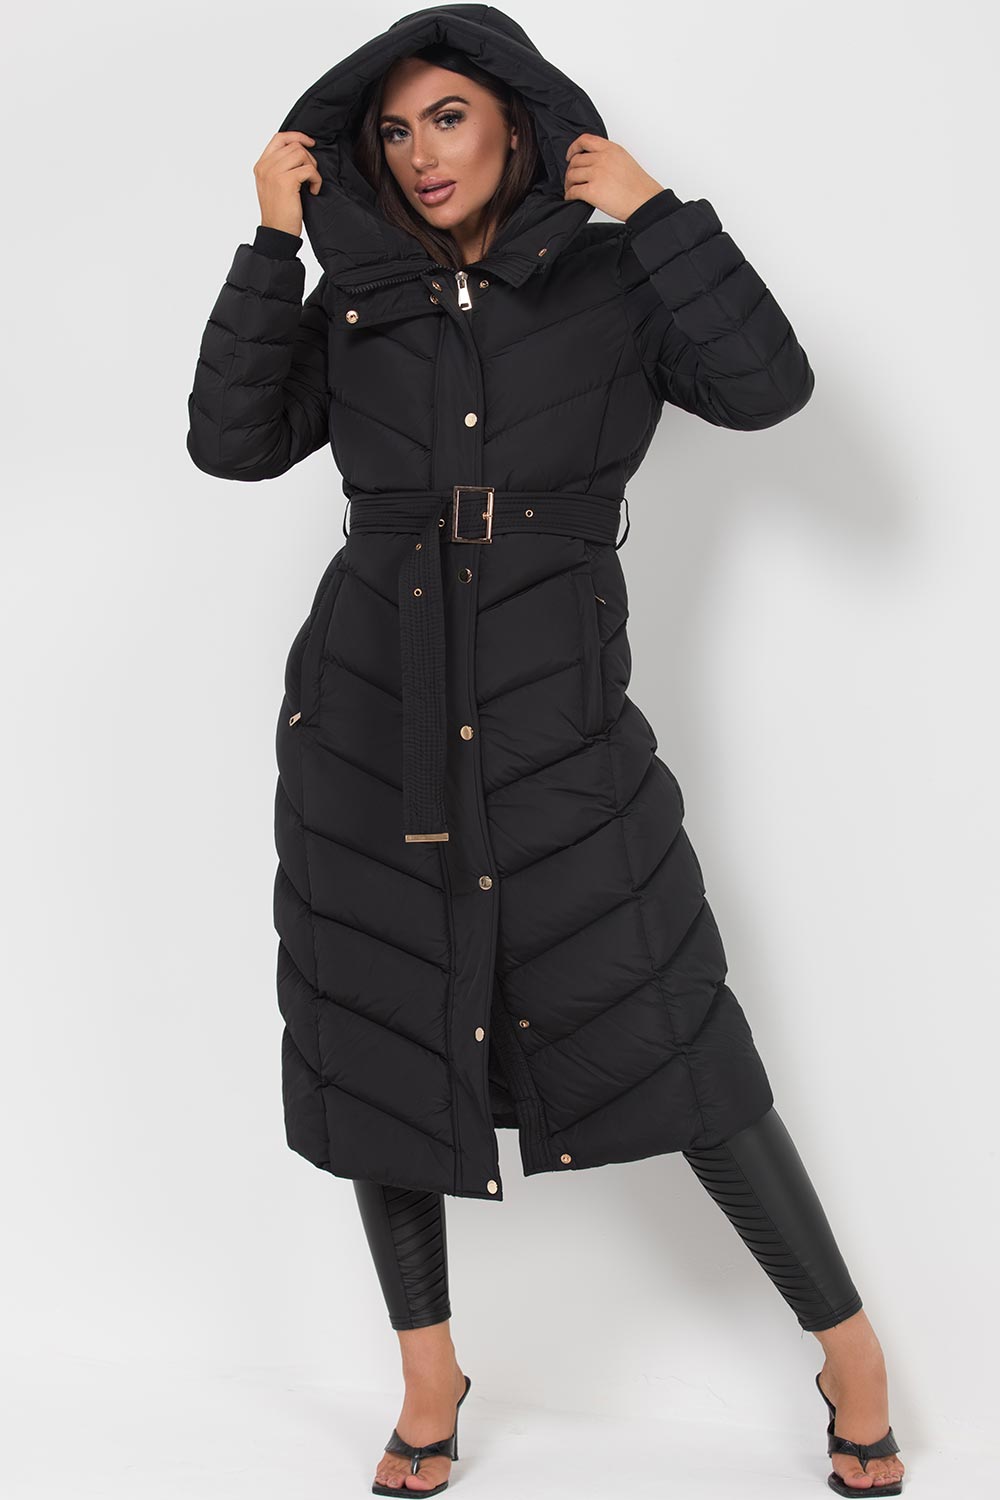 black long padded puffer coat with hood womens